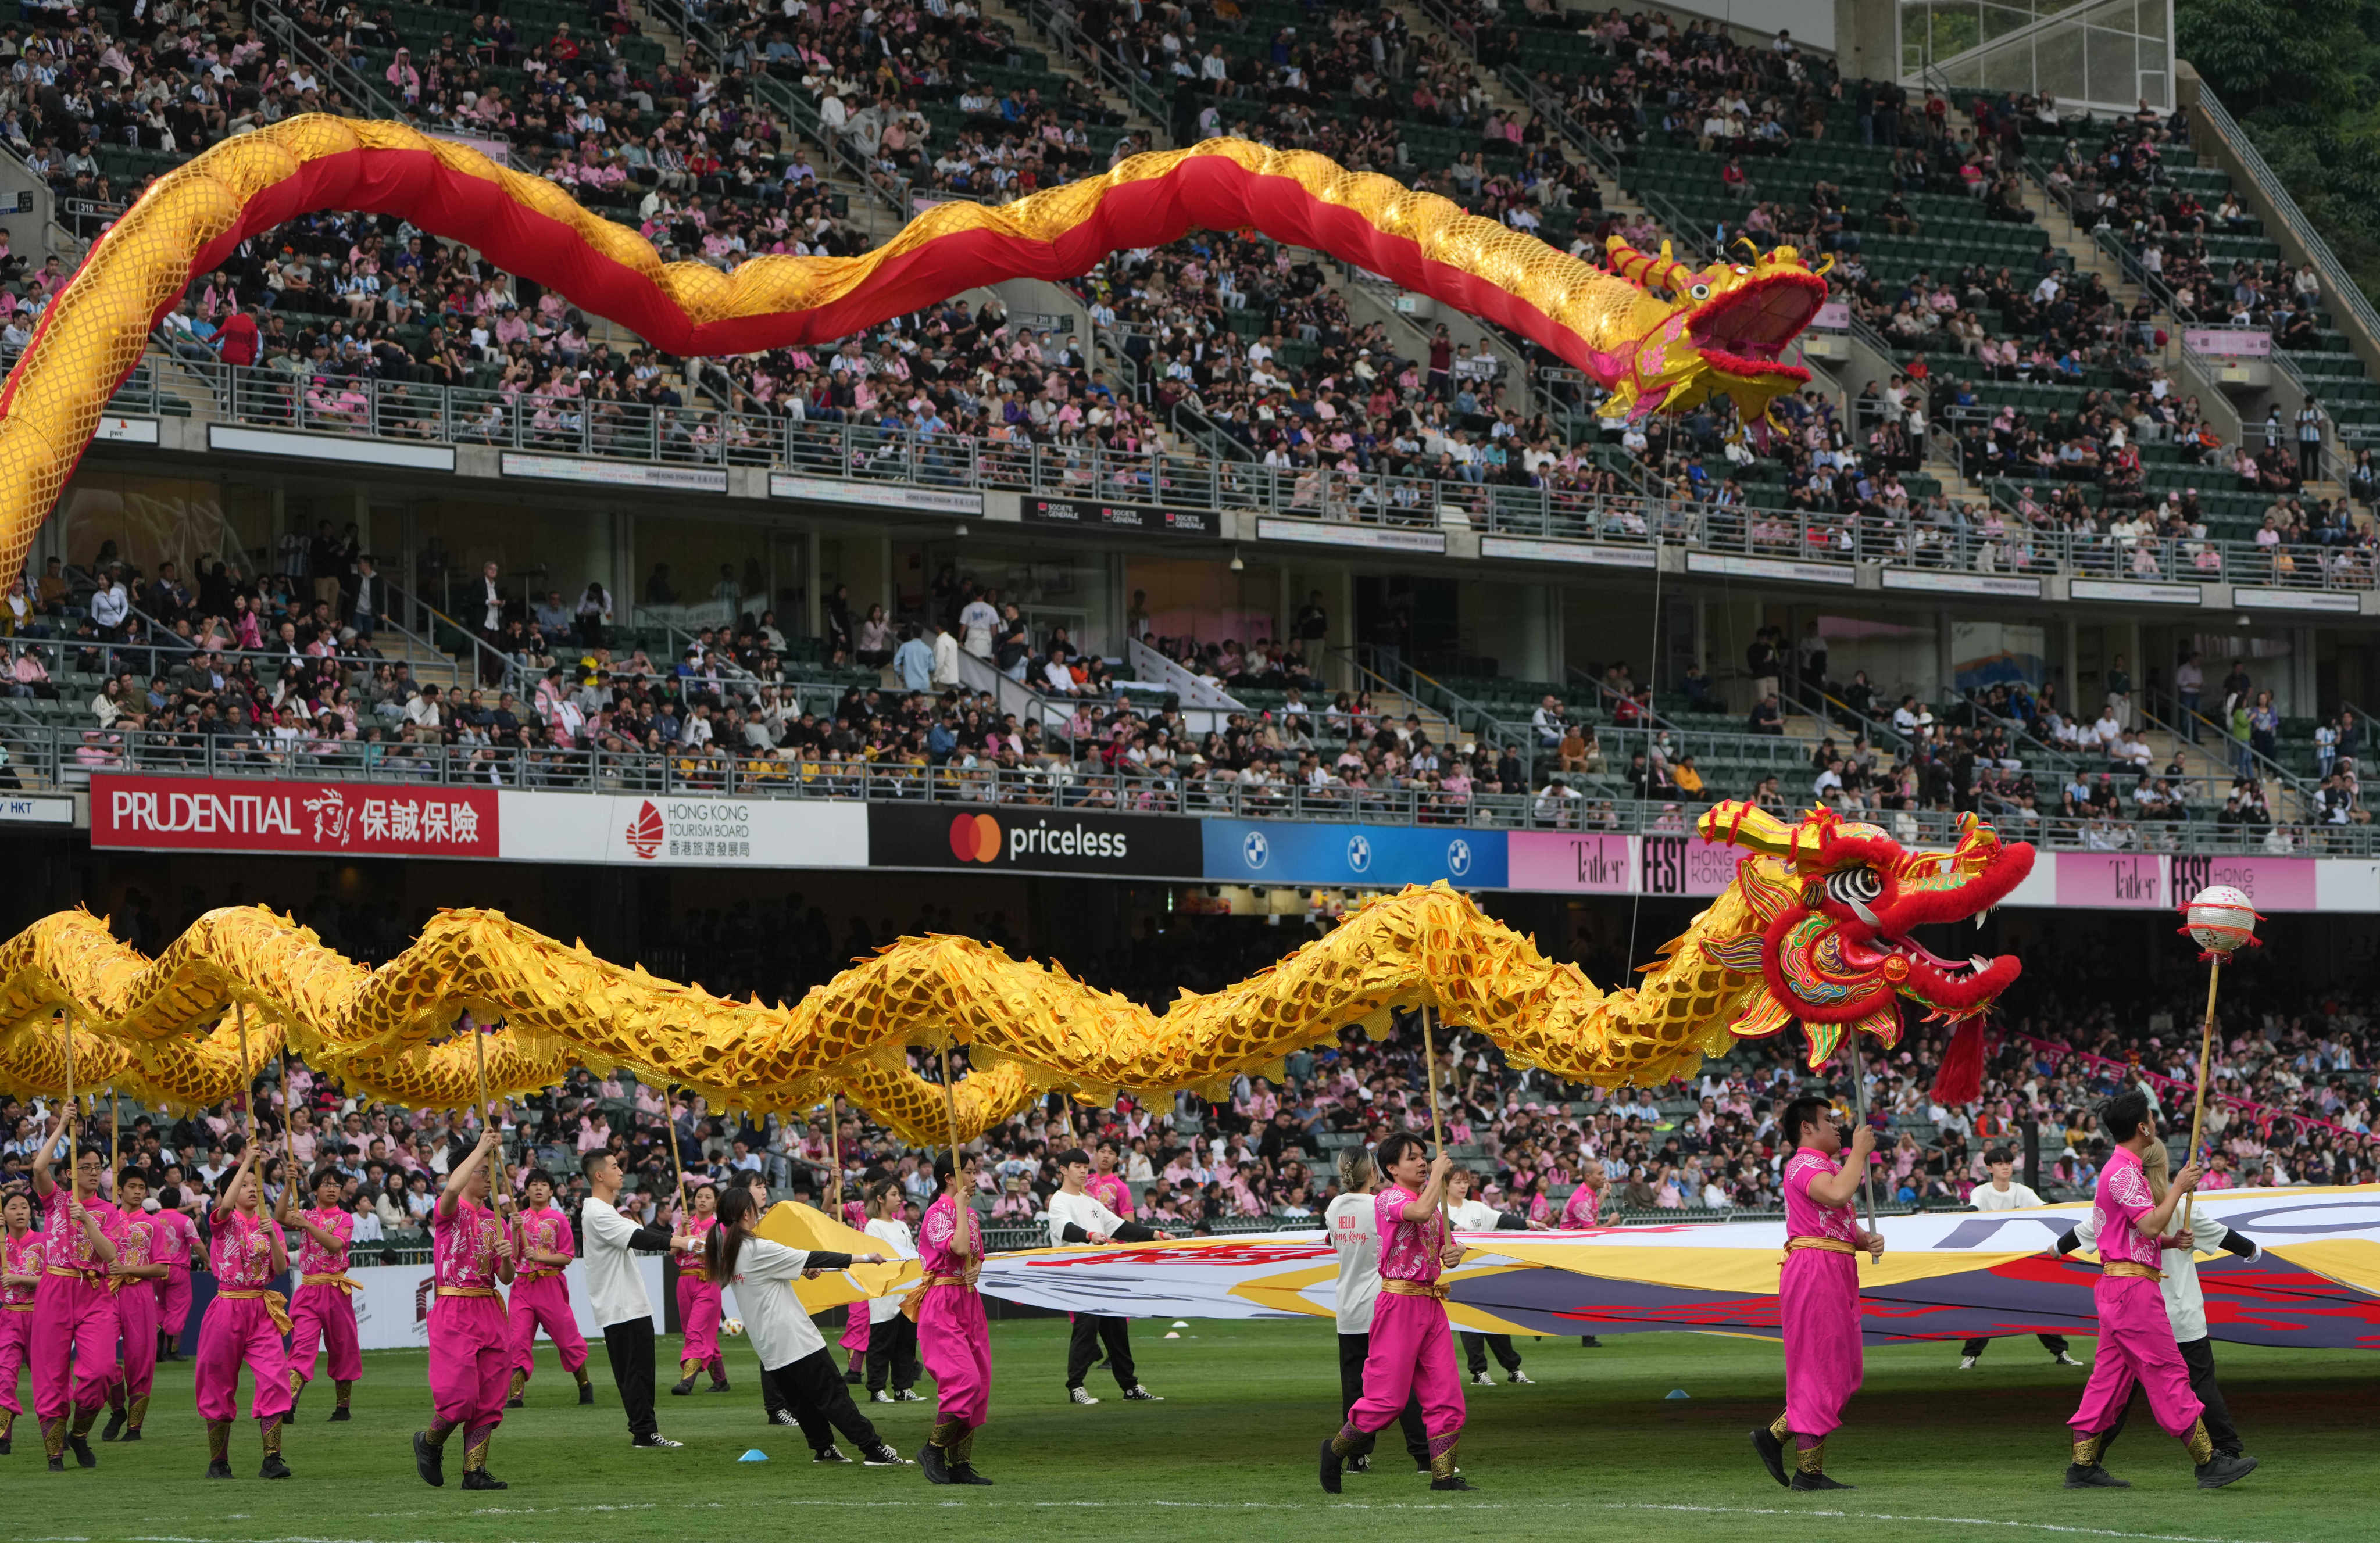 A dragon dance is performed at Hong Kong Stadium in Causeway Bay before a match in which fans expected to see Lionel Messi play for Inter Miami in a friendly match against the Hong Kong team on February 4.
Photo: Sam Tsang